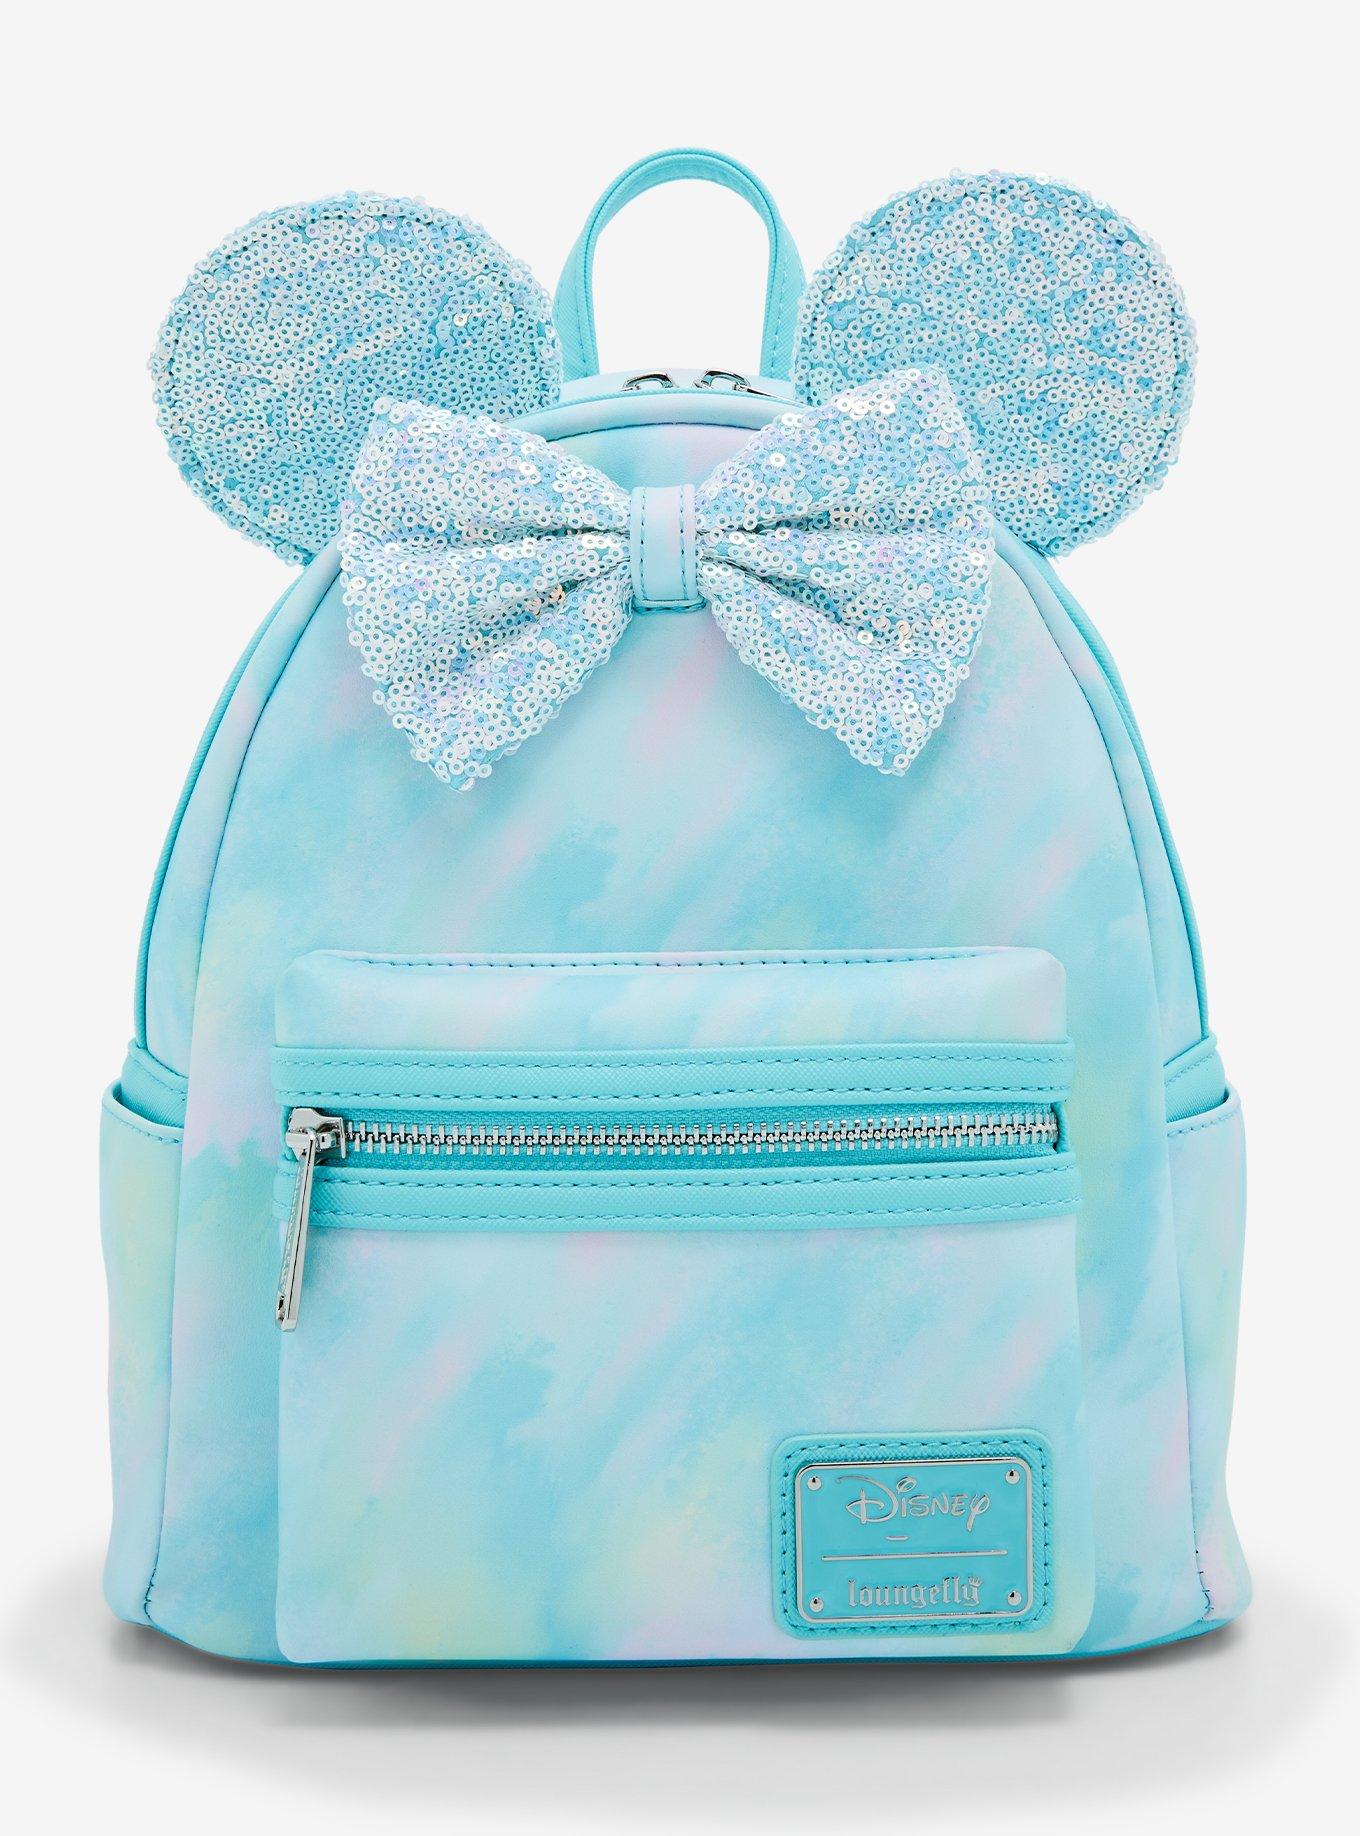 2023 boxlunch her universe sleeping beauty dress color changing mini  backpack loungefly 2 